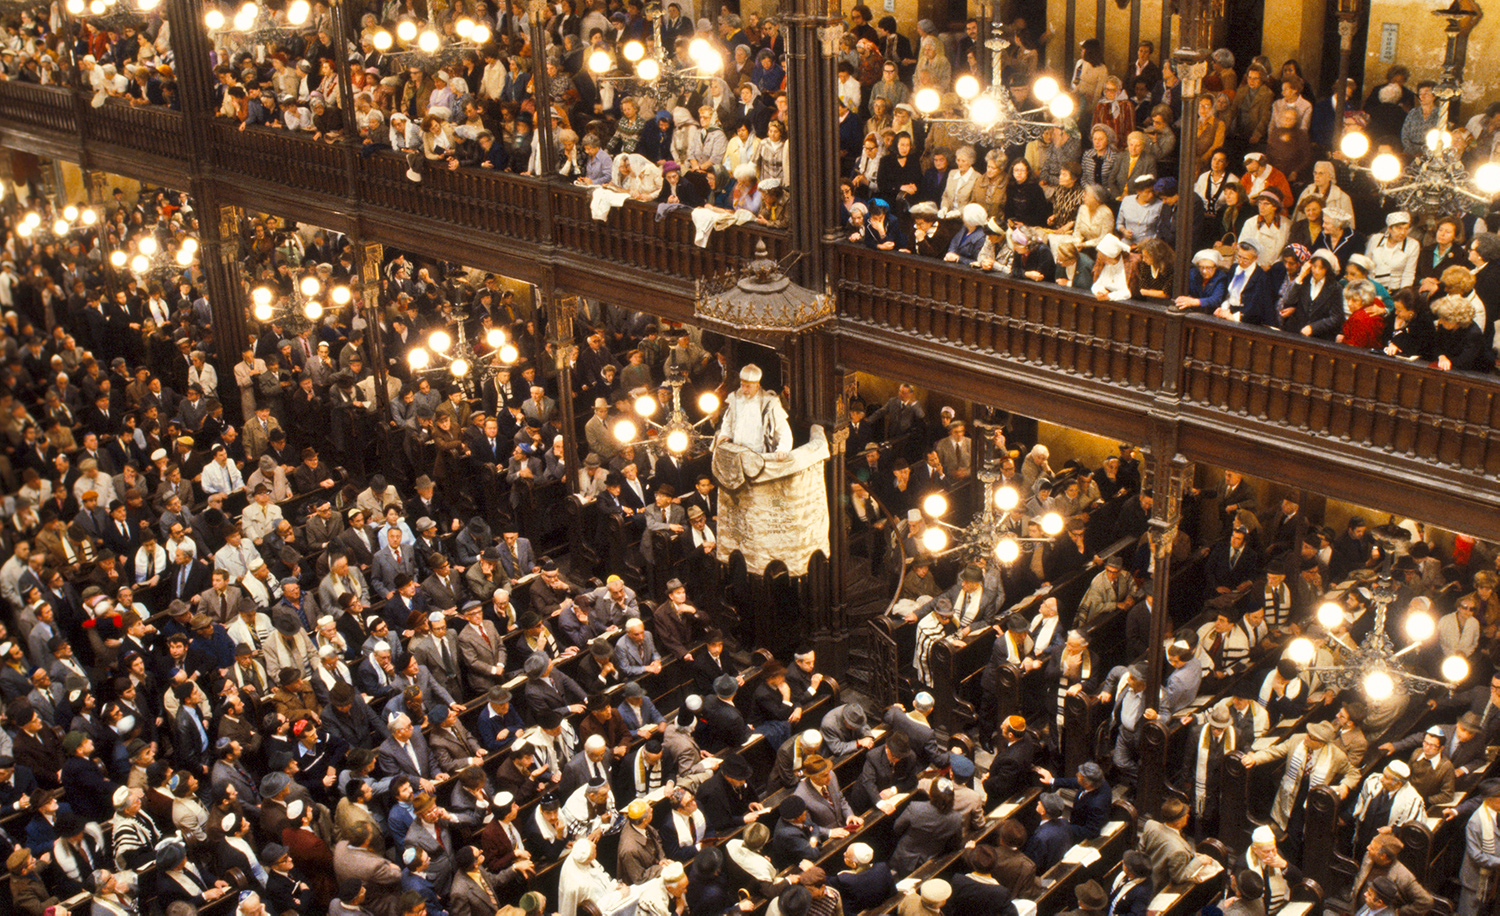 Prayer service at Dohány Street Synagogue in Budapest, Hungary. Nathan Benn/Corbis via Getty Images.
